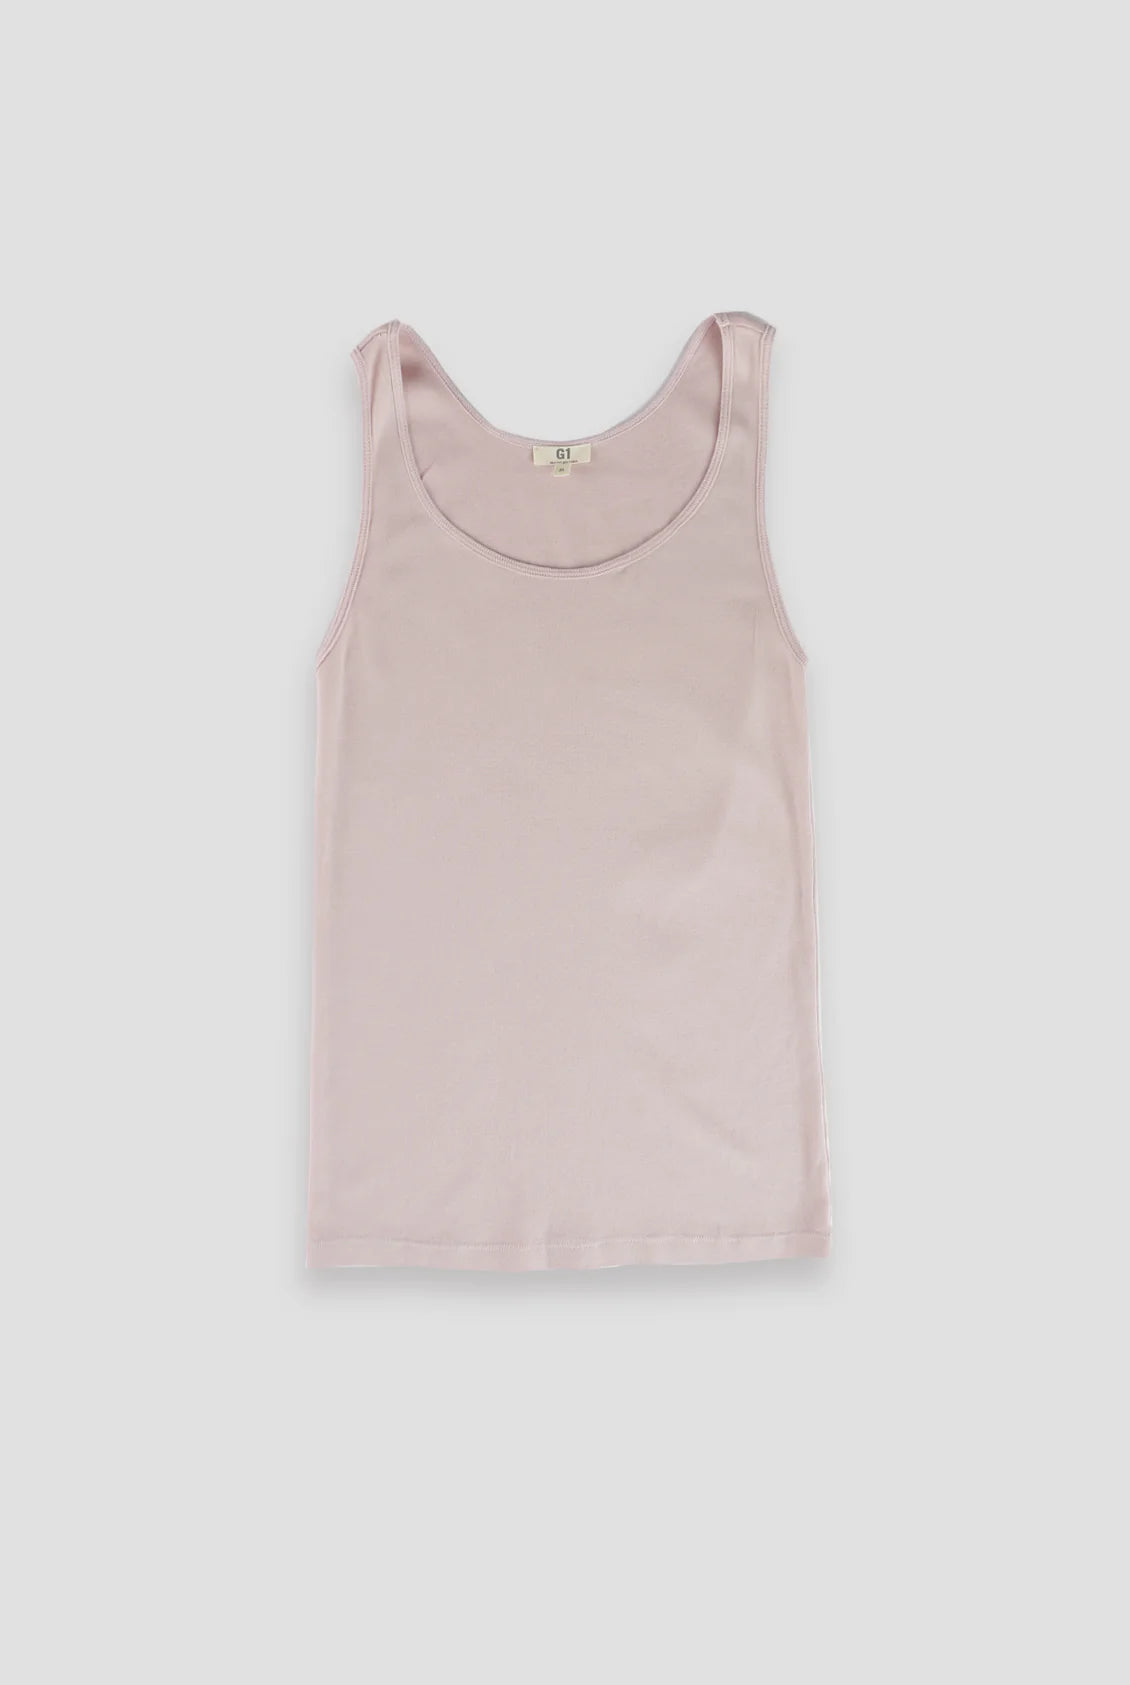 BABY RIB TANK IN DUSTY PINK - Romi Boutique